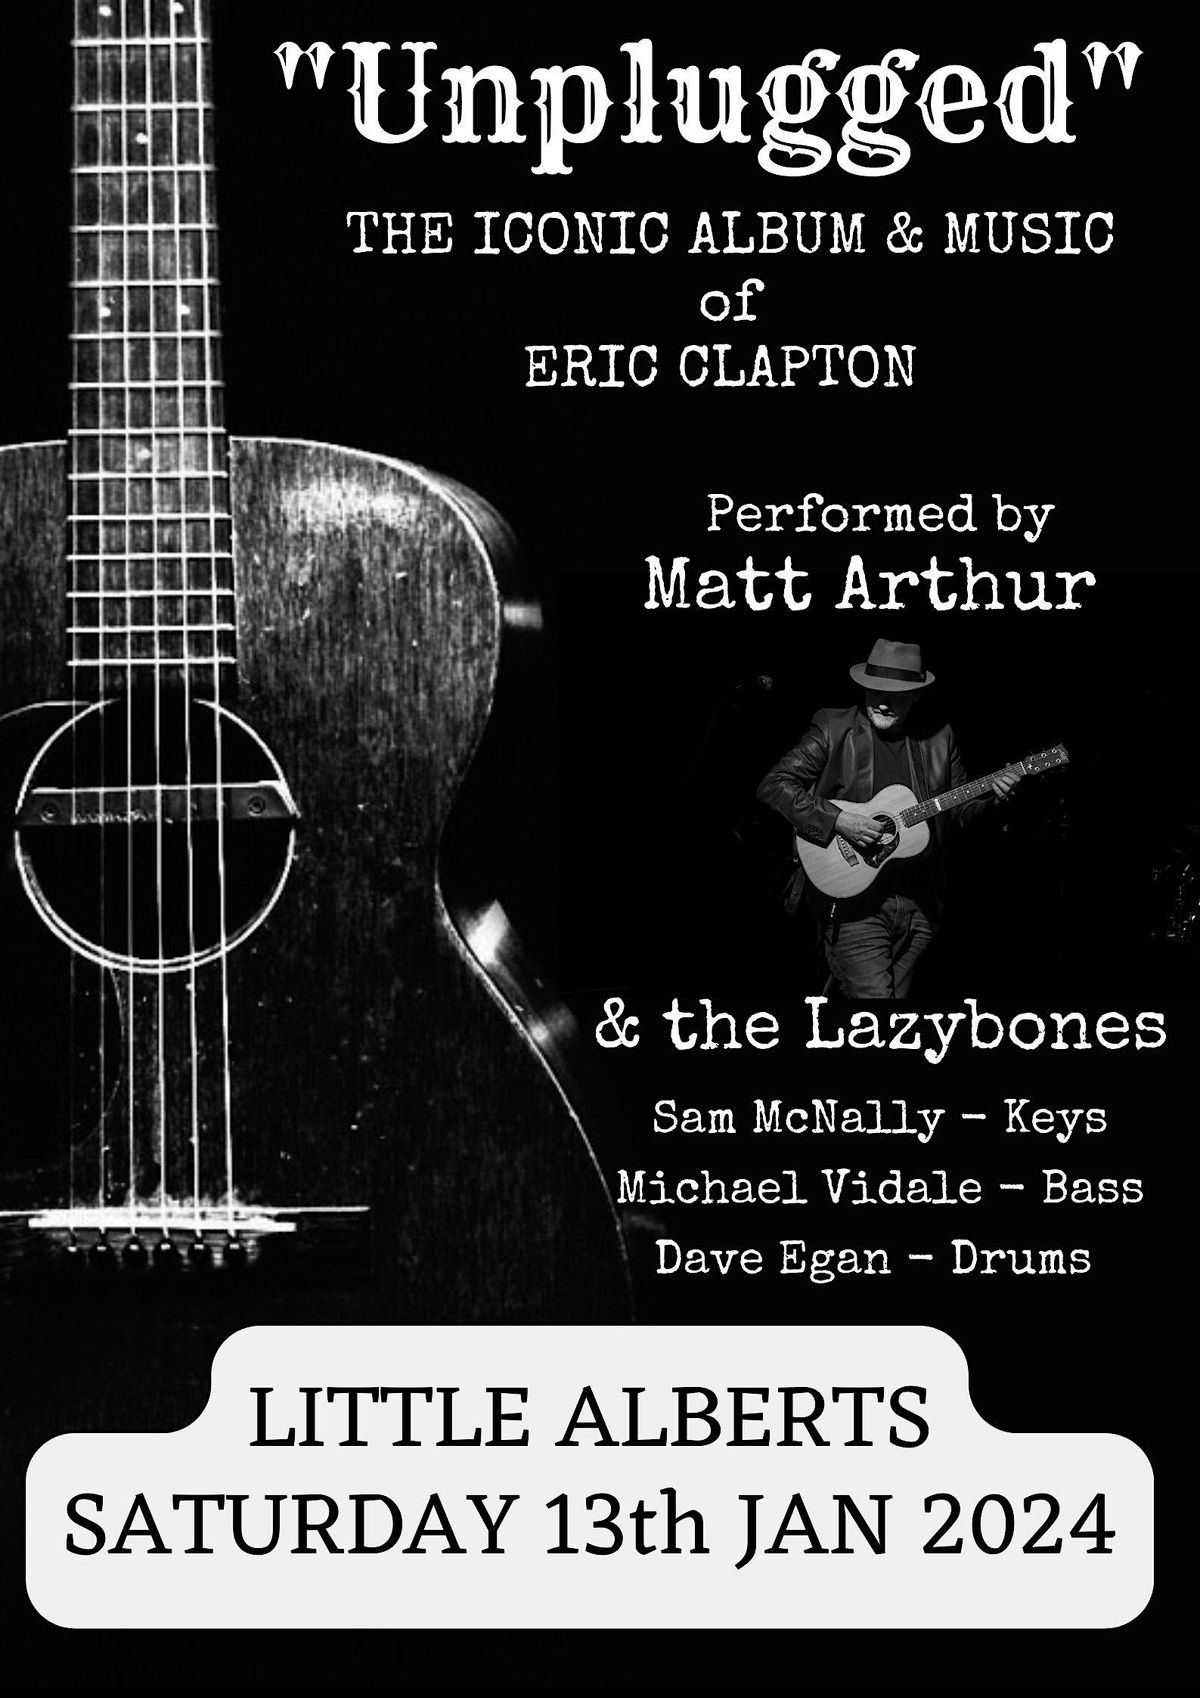 Eric Clapton's "Unplugged" performed by Matt Arthur & The Lazybones!